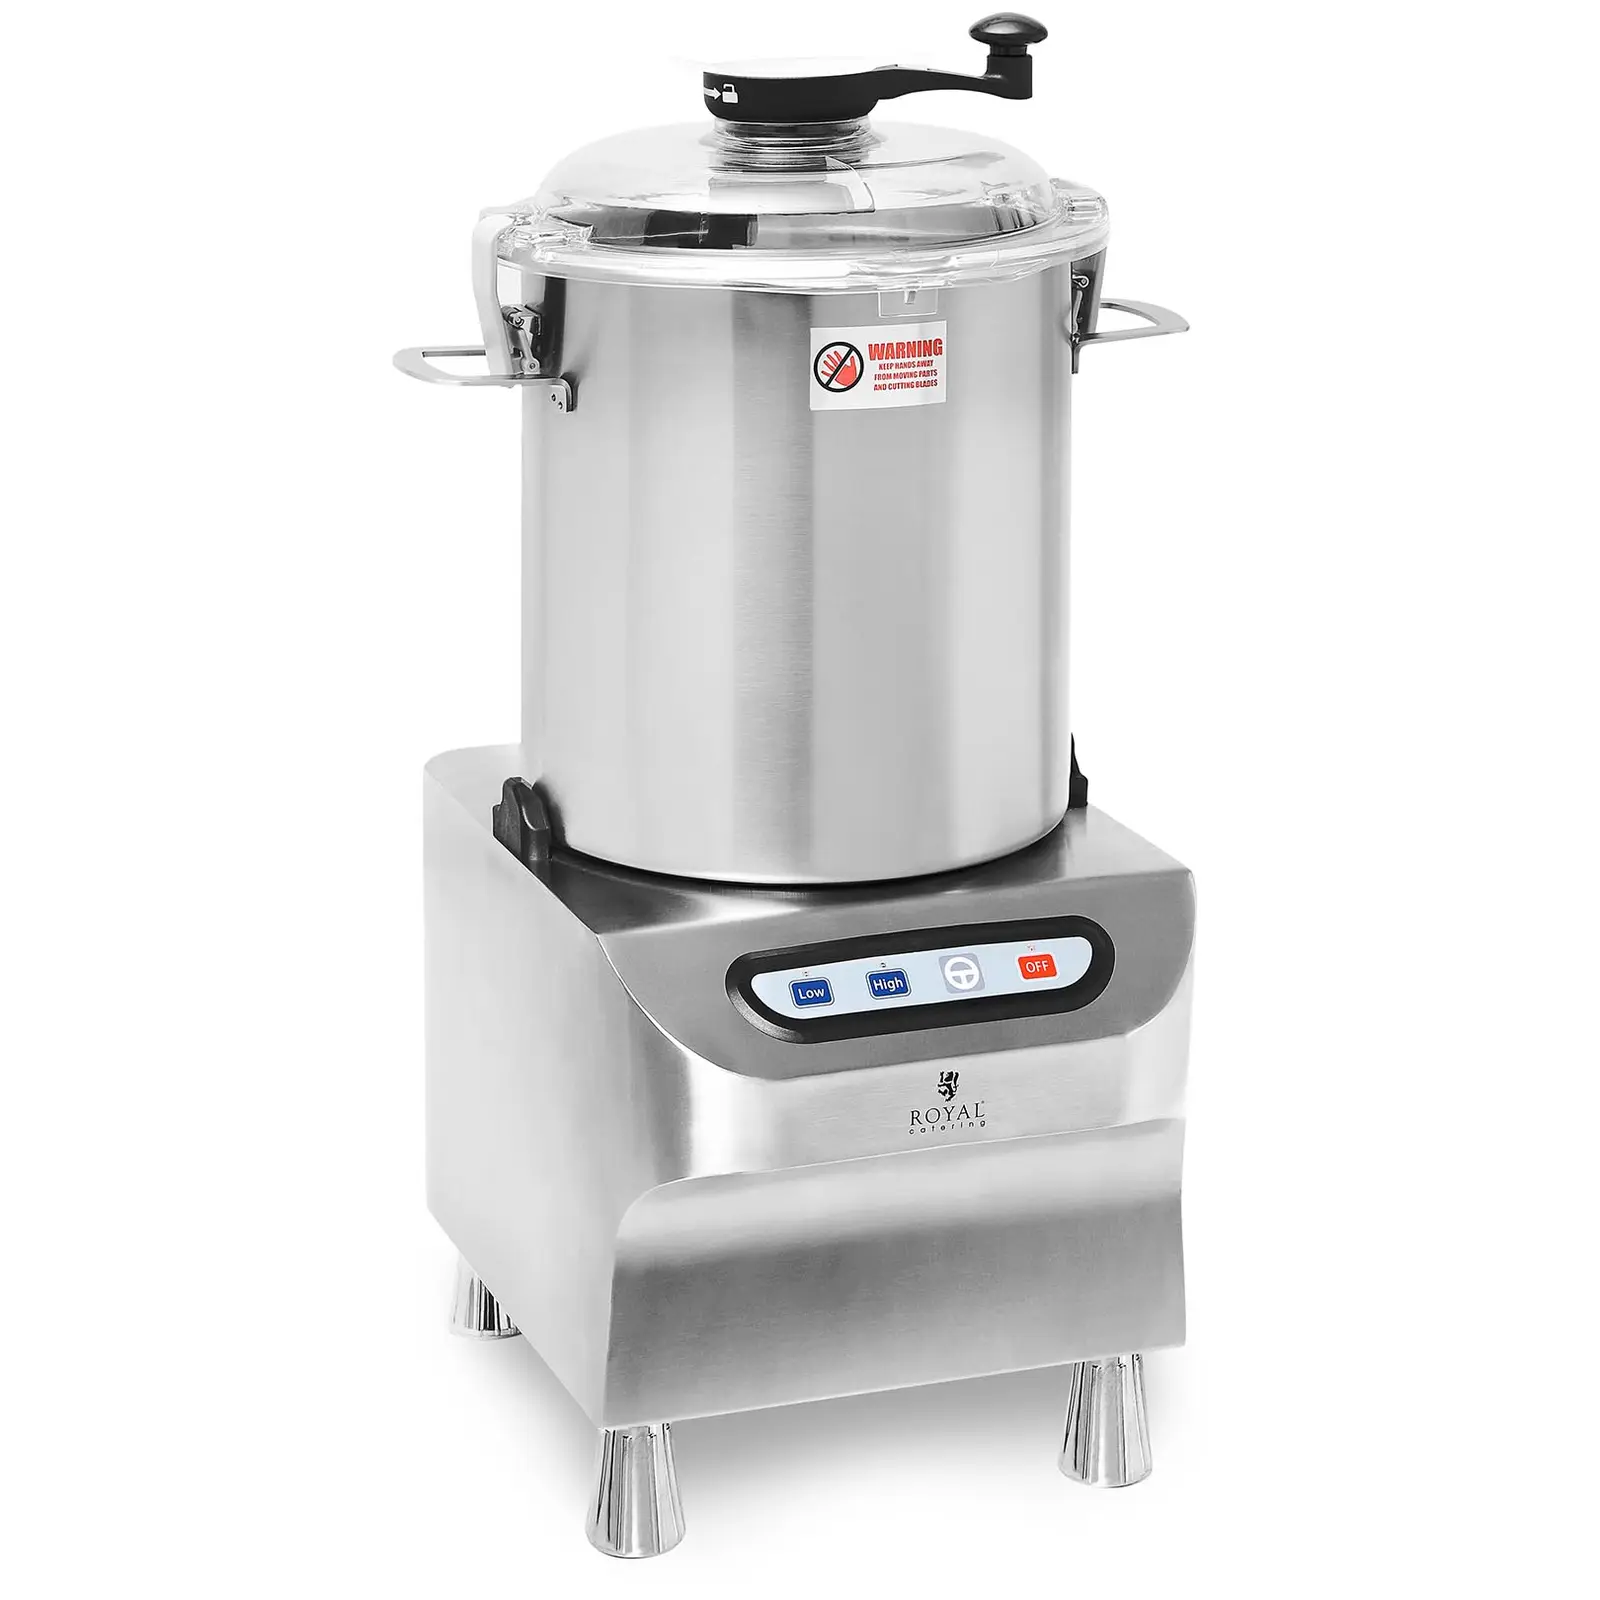 Bowl Cutter - 1500/2200 rpm - Royal Catering - 18 L